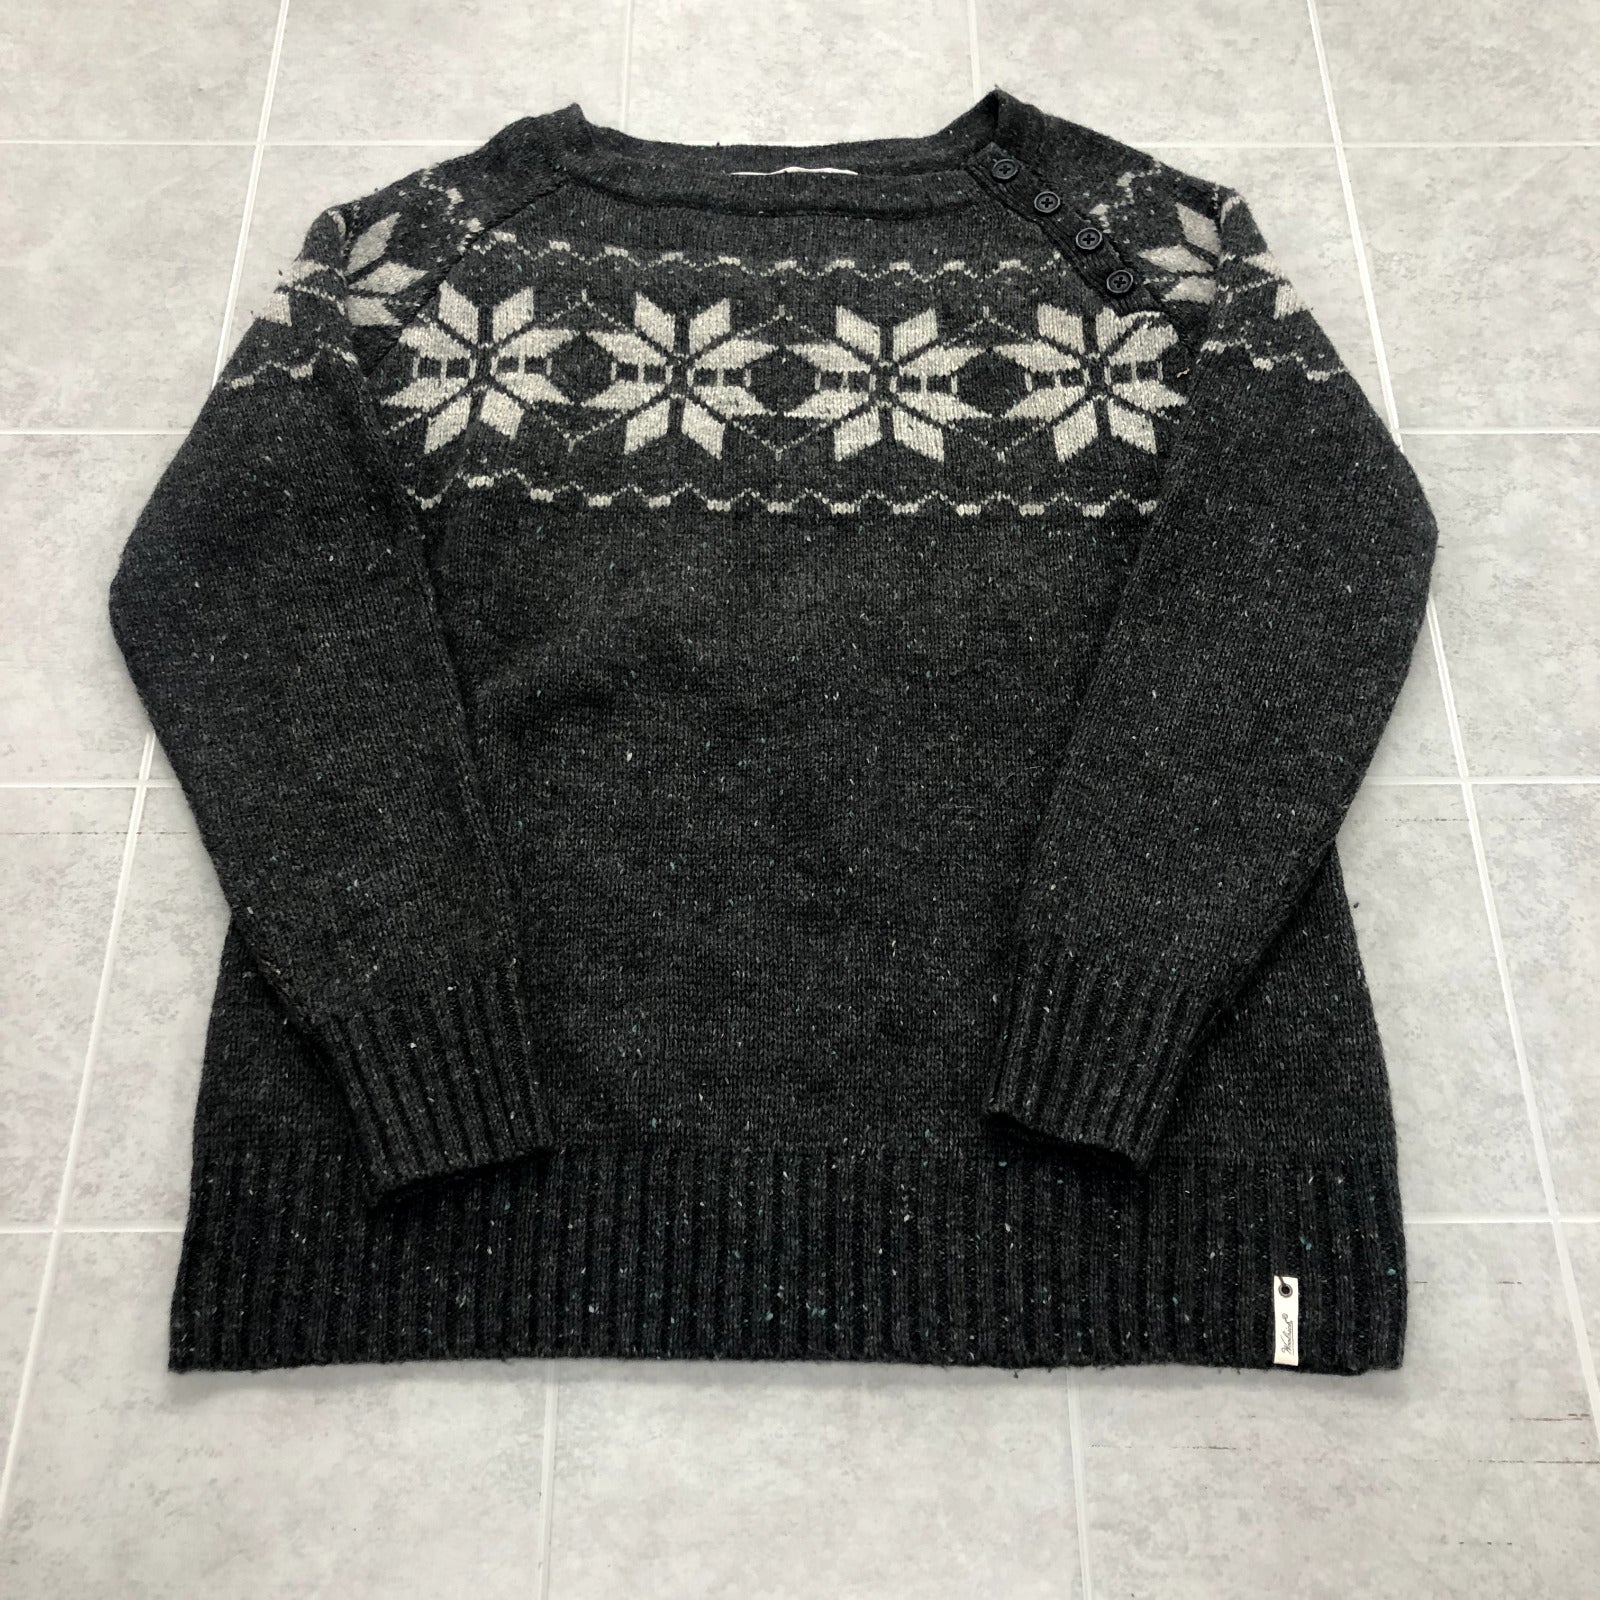 Woolrich Charcoal Gray Long Sleeve Holiday Pullover Sweater Adult Size M